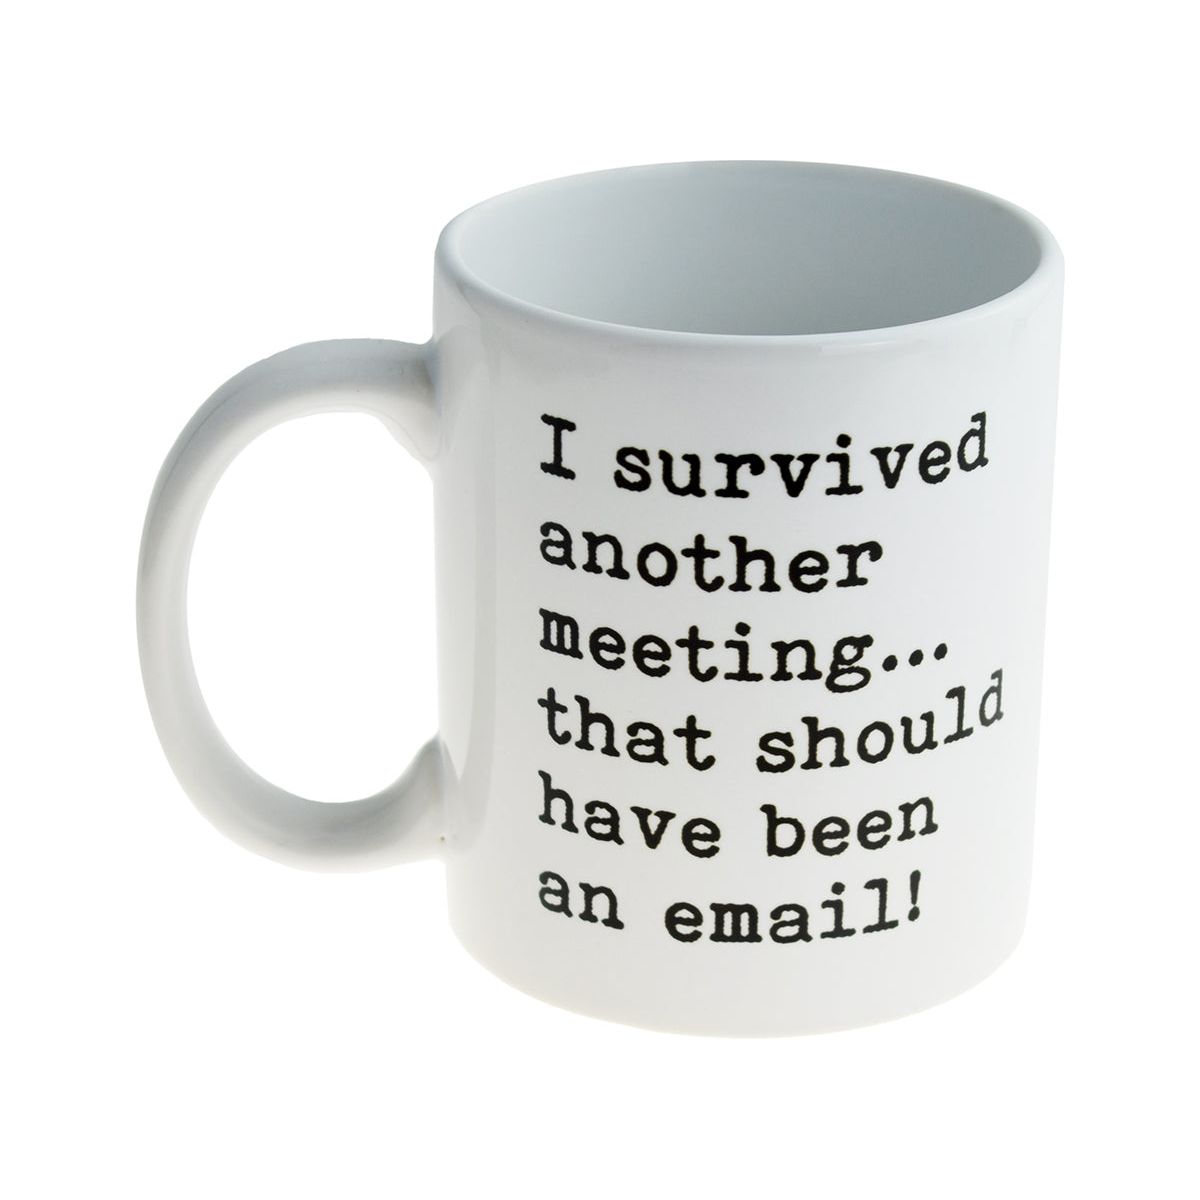 I Survived Another Meeting Fun Ceramic Mug - Ashton and Finch